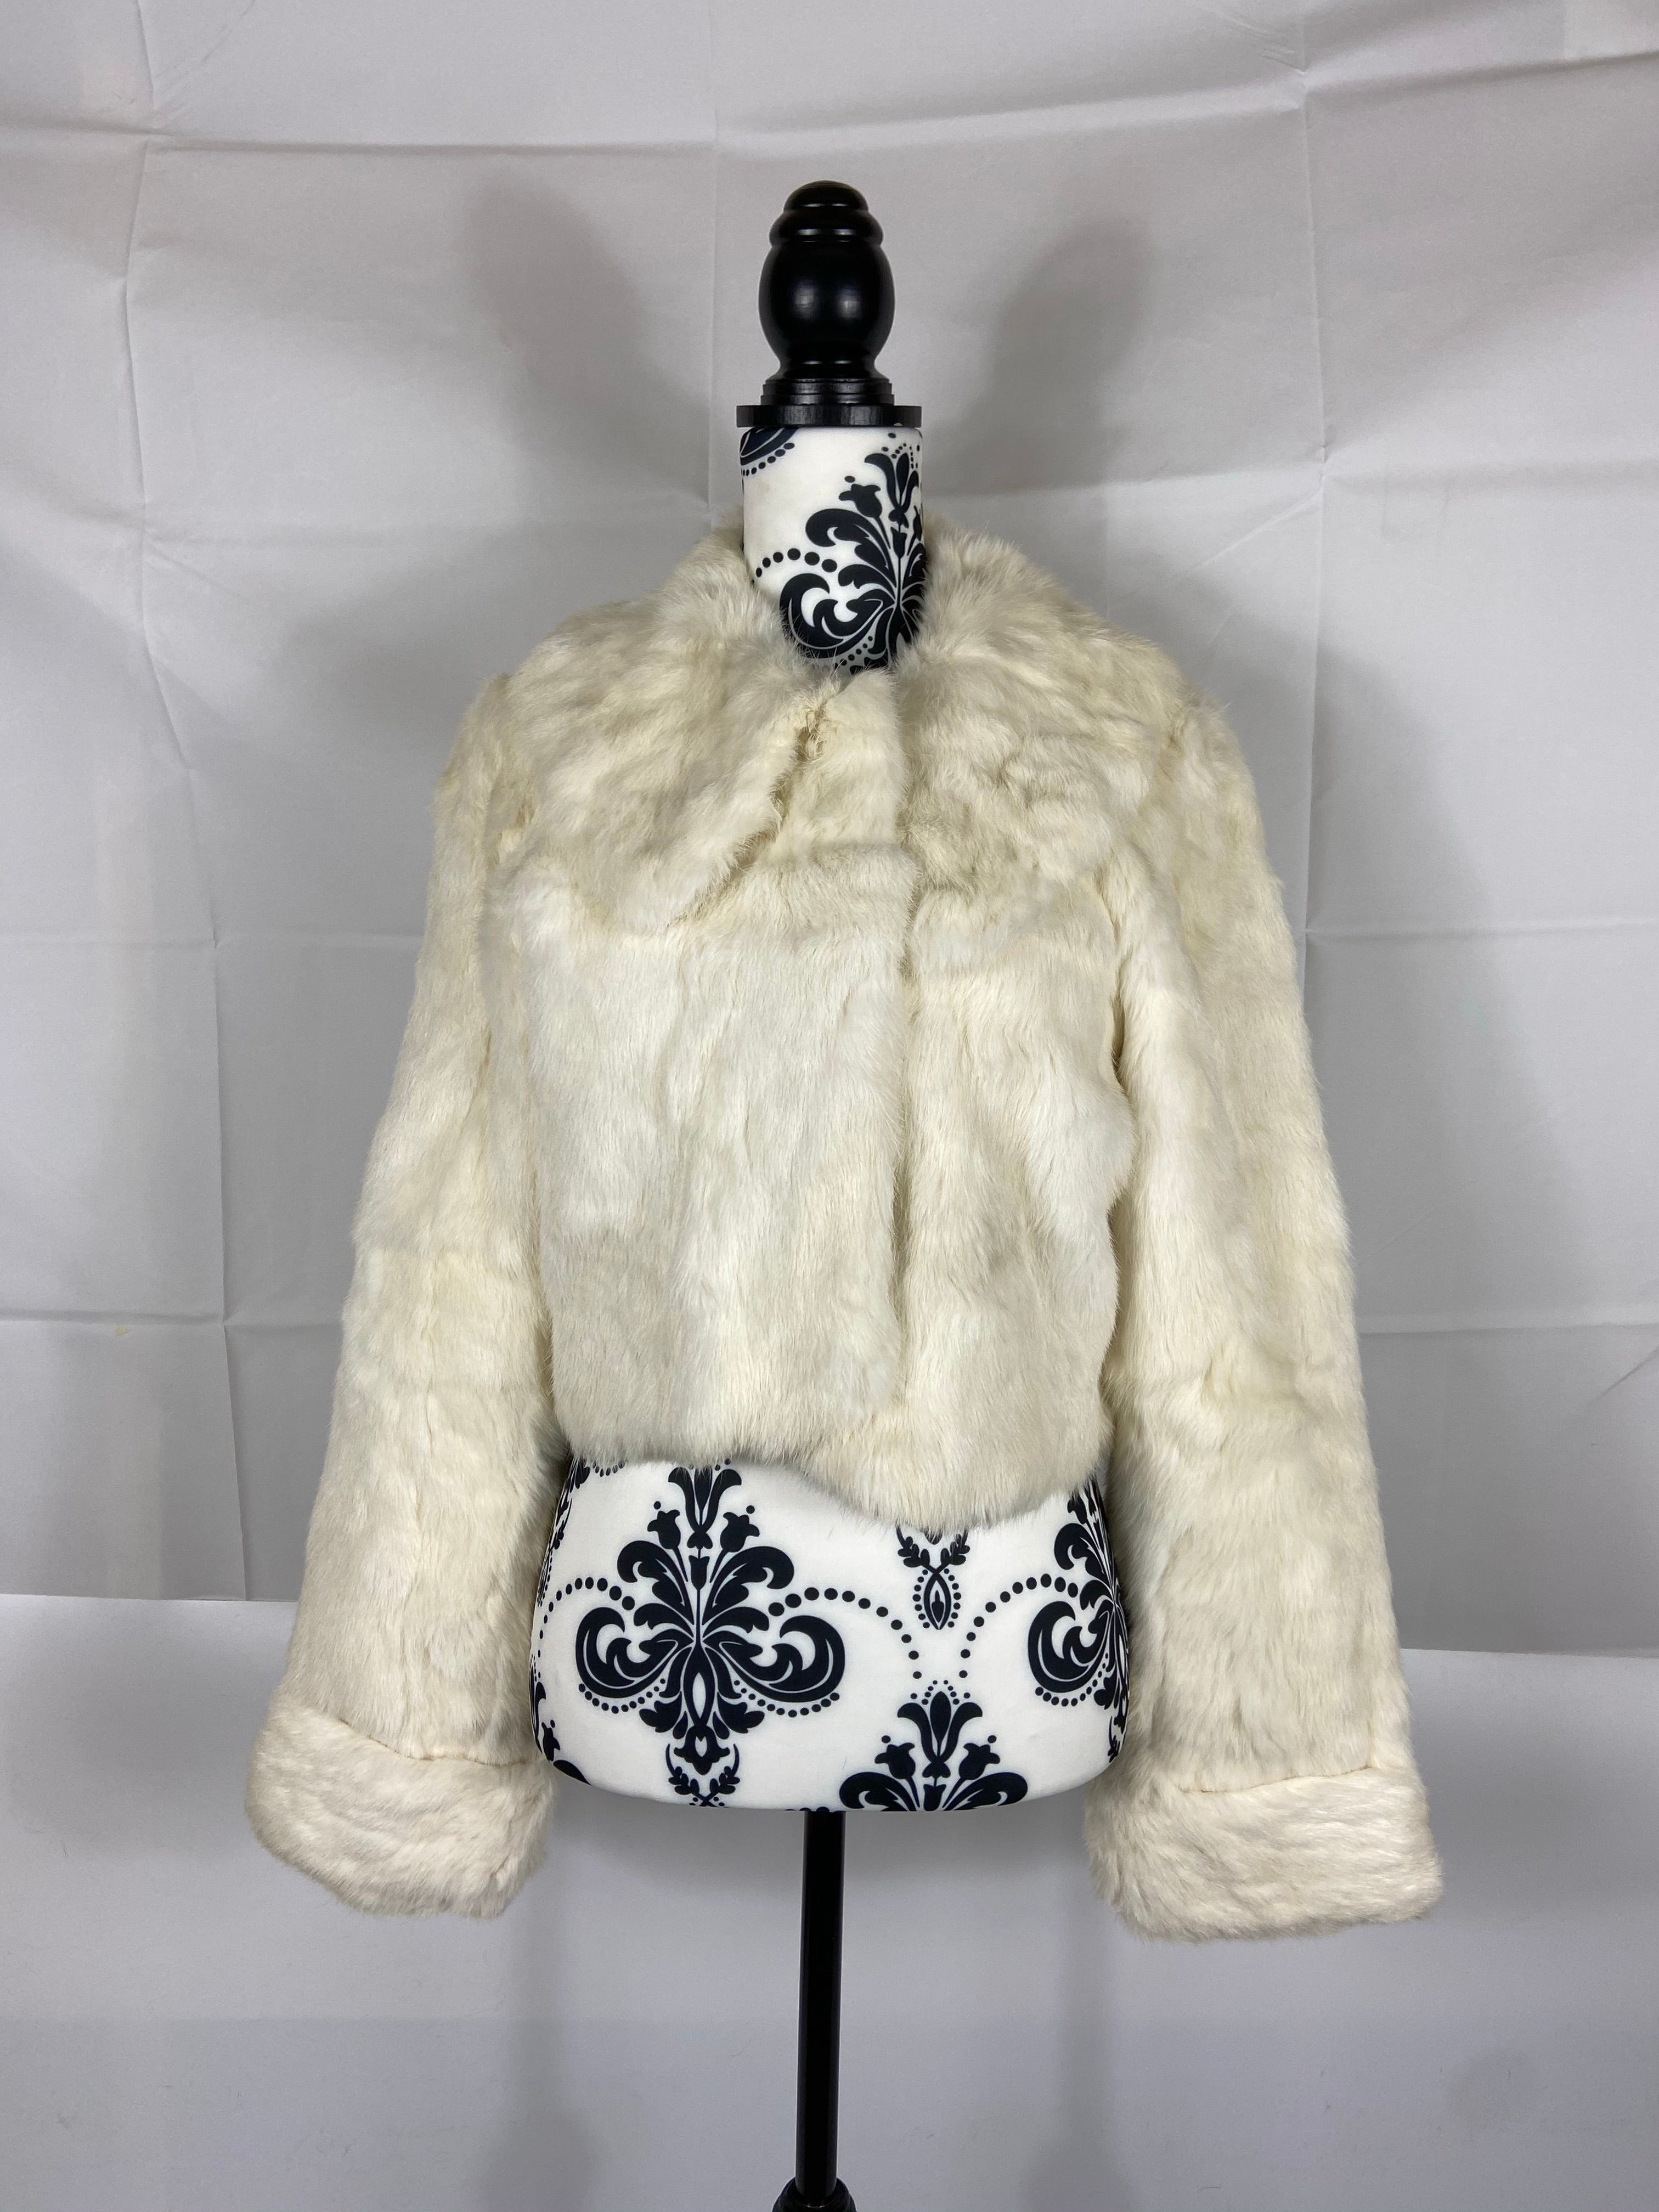 Vintage Women’s Cropped Real White Rabbit Fur Coat Size: Small